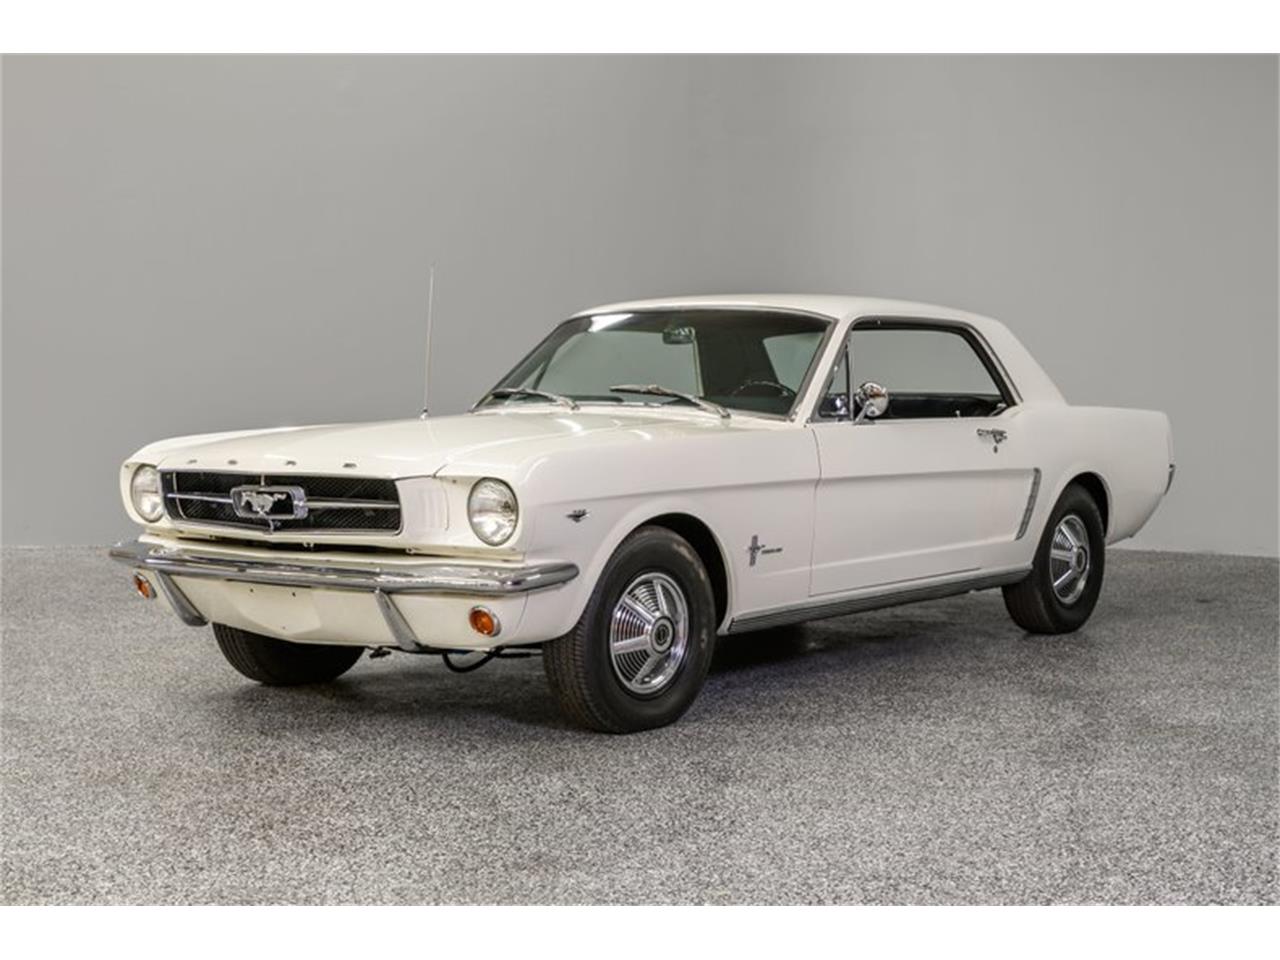 1965 Ford Mustang for sale in Concord, NC / ClassicCarsBay.com